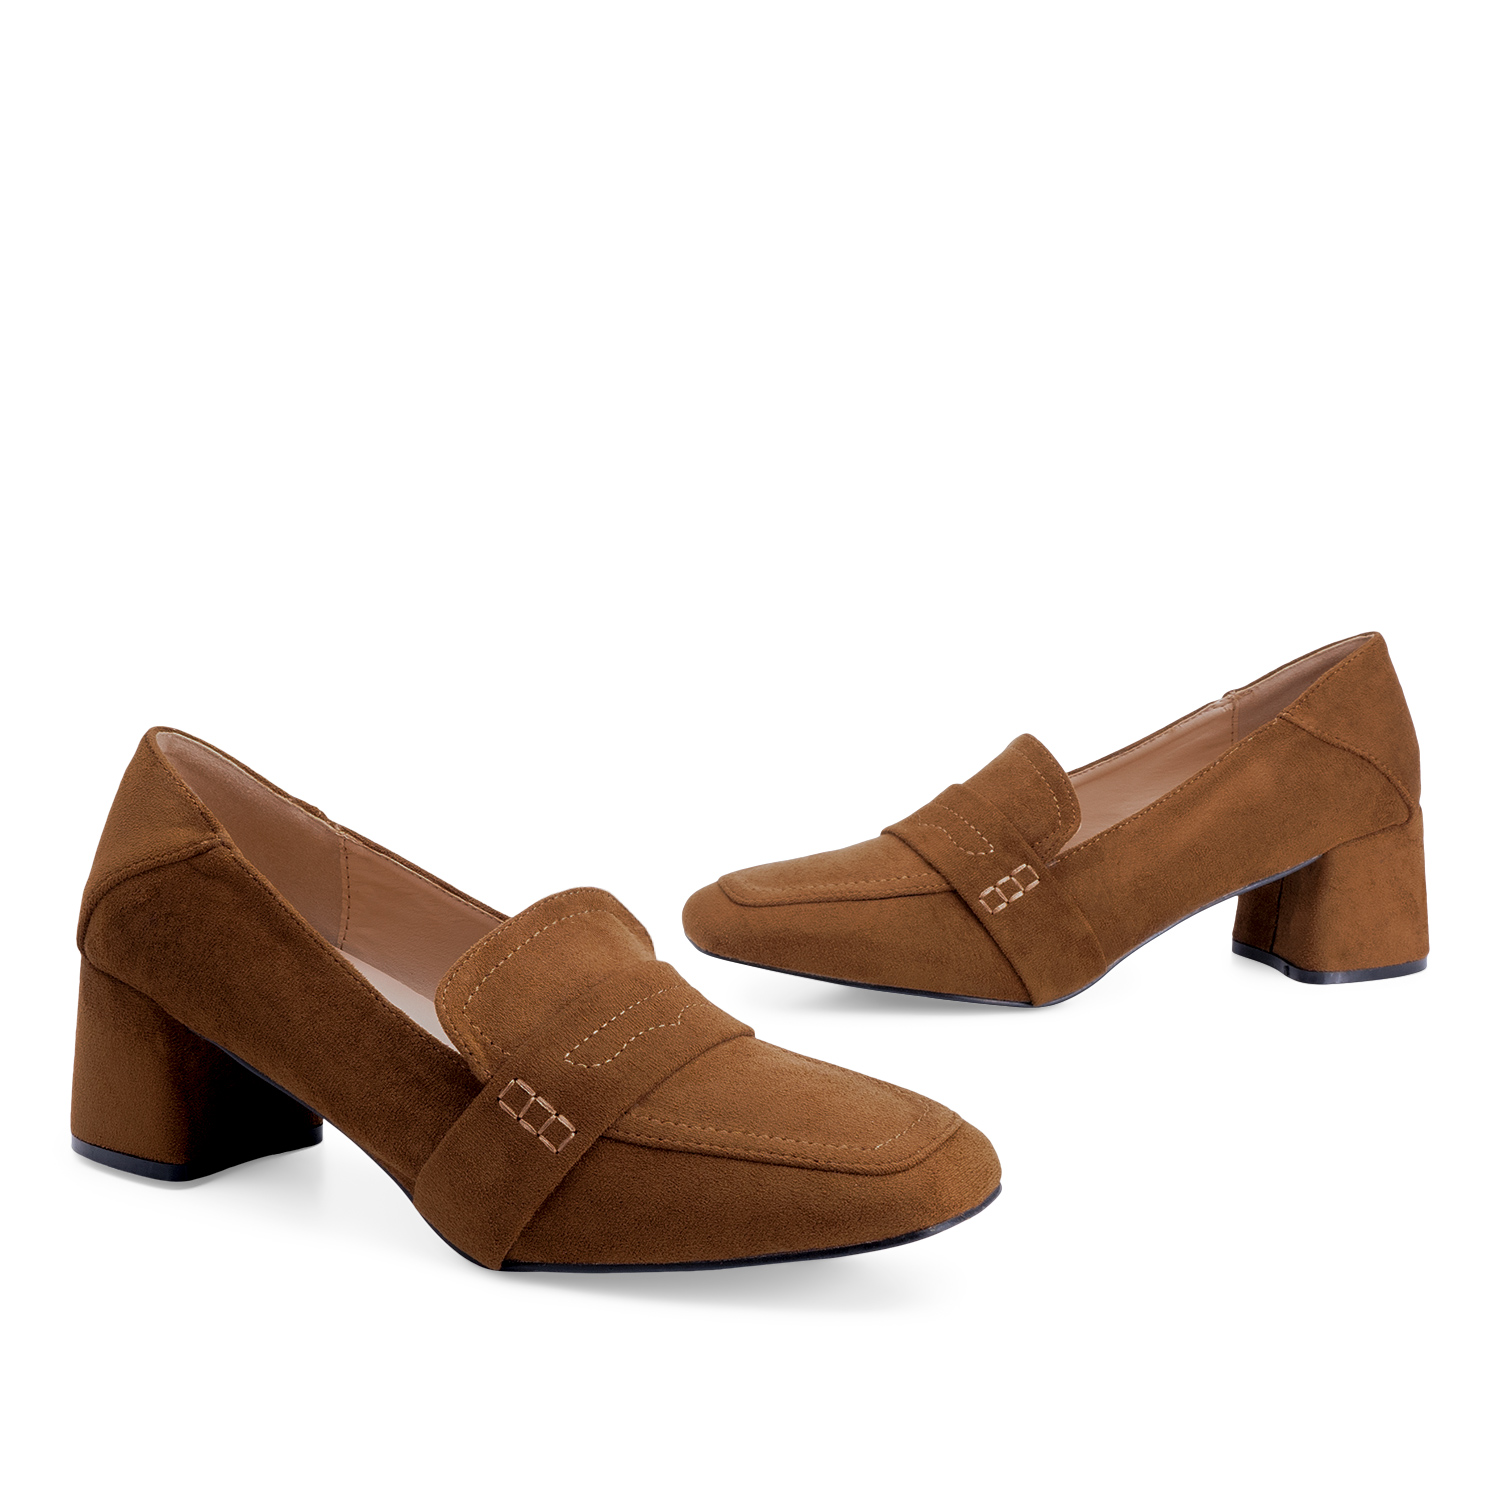 Heeled moccasin in camel colored faux suede 